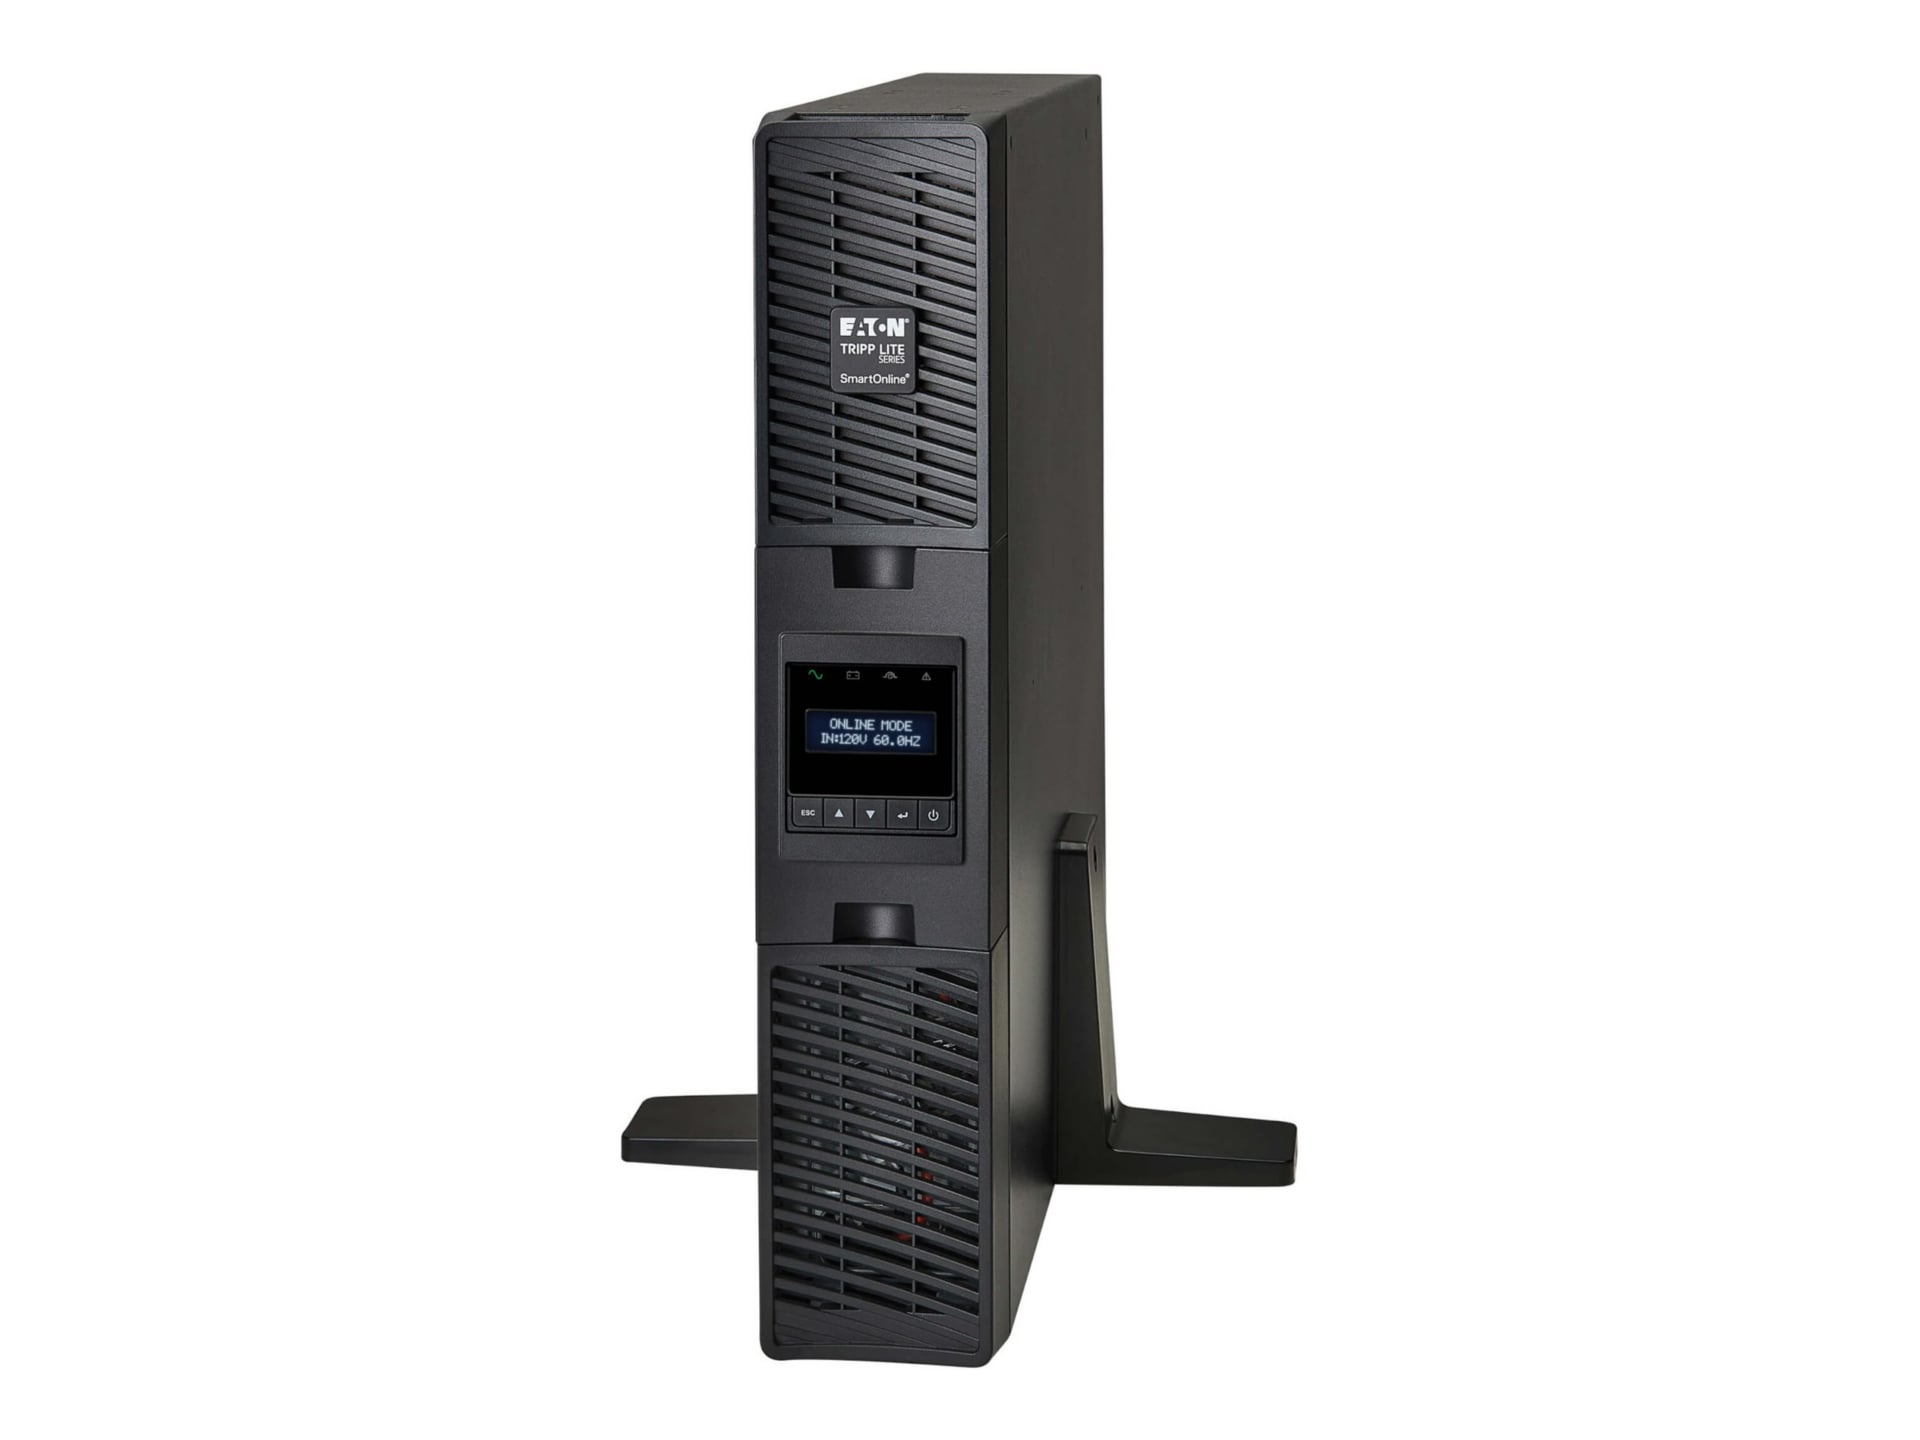 Eaton Tripp Lite Series SmartOnline 1500VA 1350W 120V Double-Conversion UPS - 8 Outlets, Extended Run, Network Card